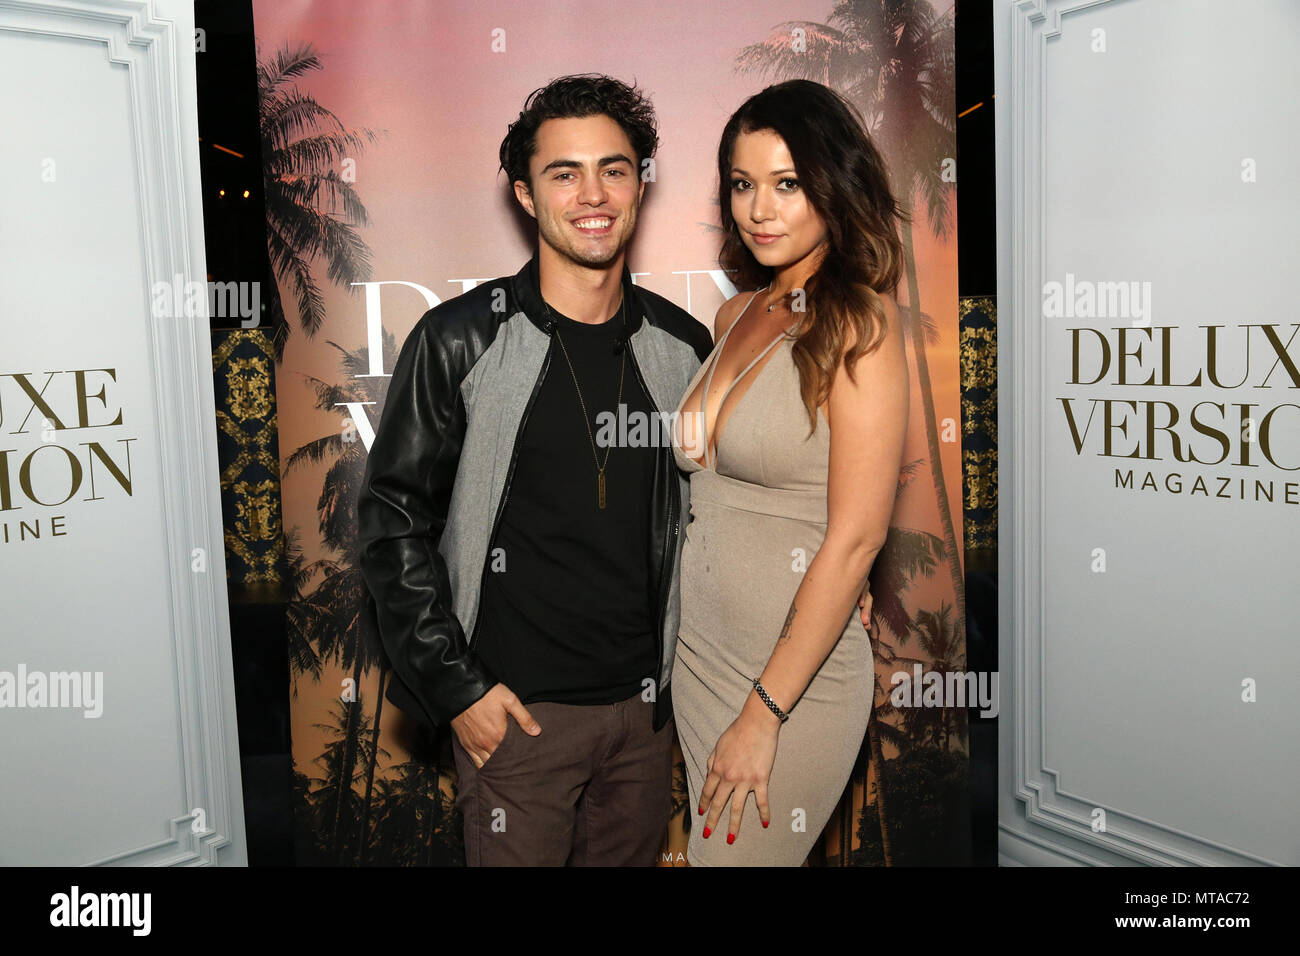 Celebrities attend "Deluxe Version" Magazine Launch event at Hyde Sunset.  Featuring: Darren Barnet, Ali Rose Where: Los Angeles, California, United  States When: 26 Apr 2018 Credit: Brian To/WENN.com Stock Photo - Alamy